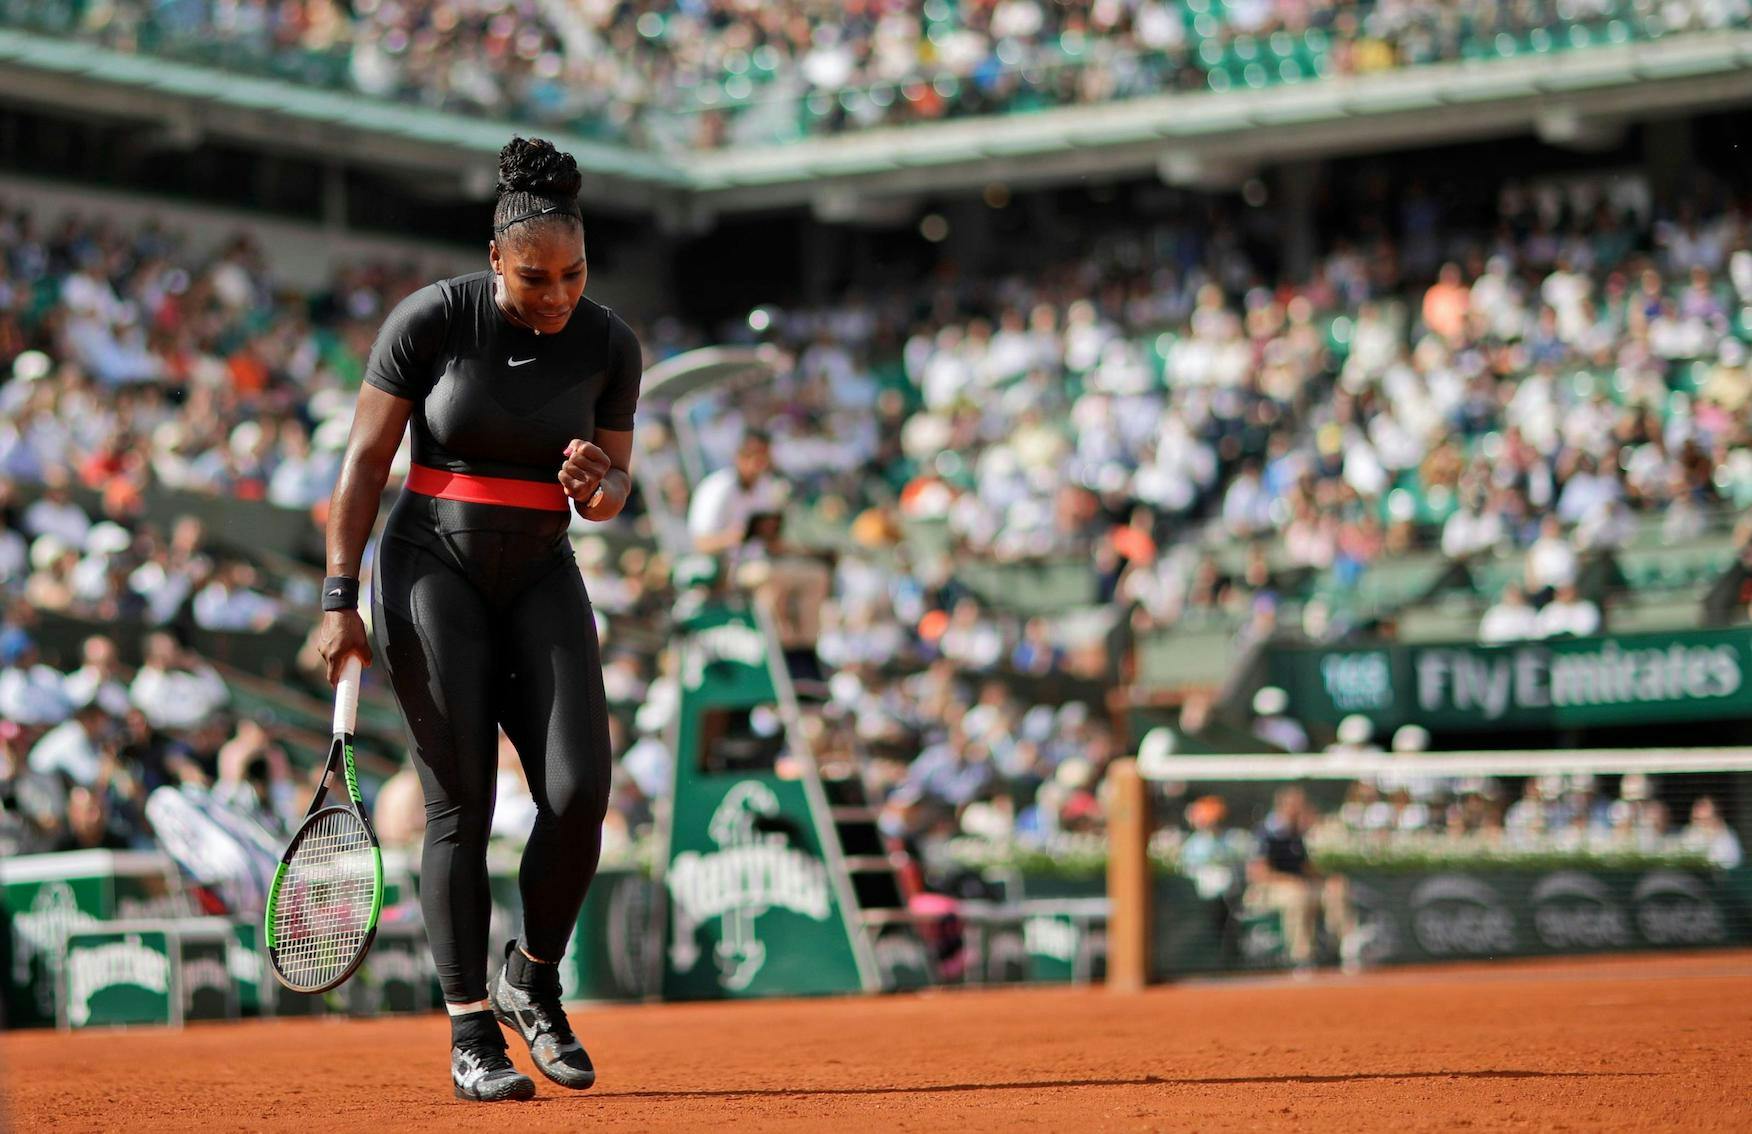 “Sexism and Elitism”: Serena Williams Faces Backlash for Everything But Her Playing